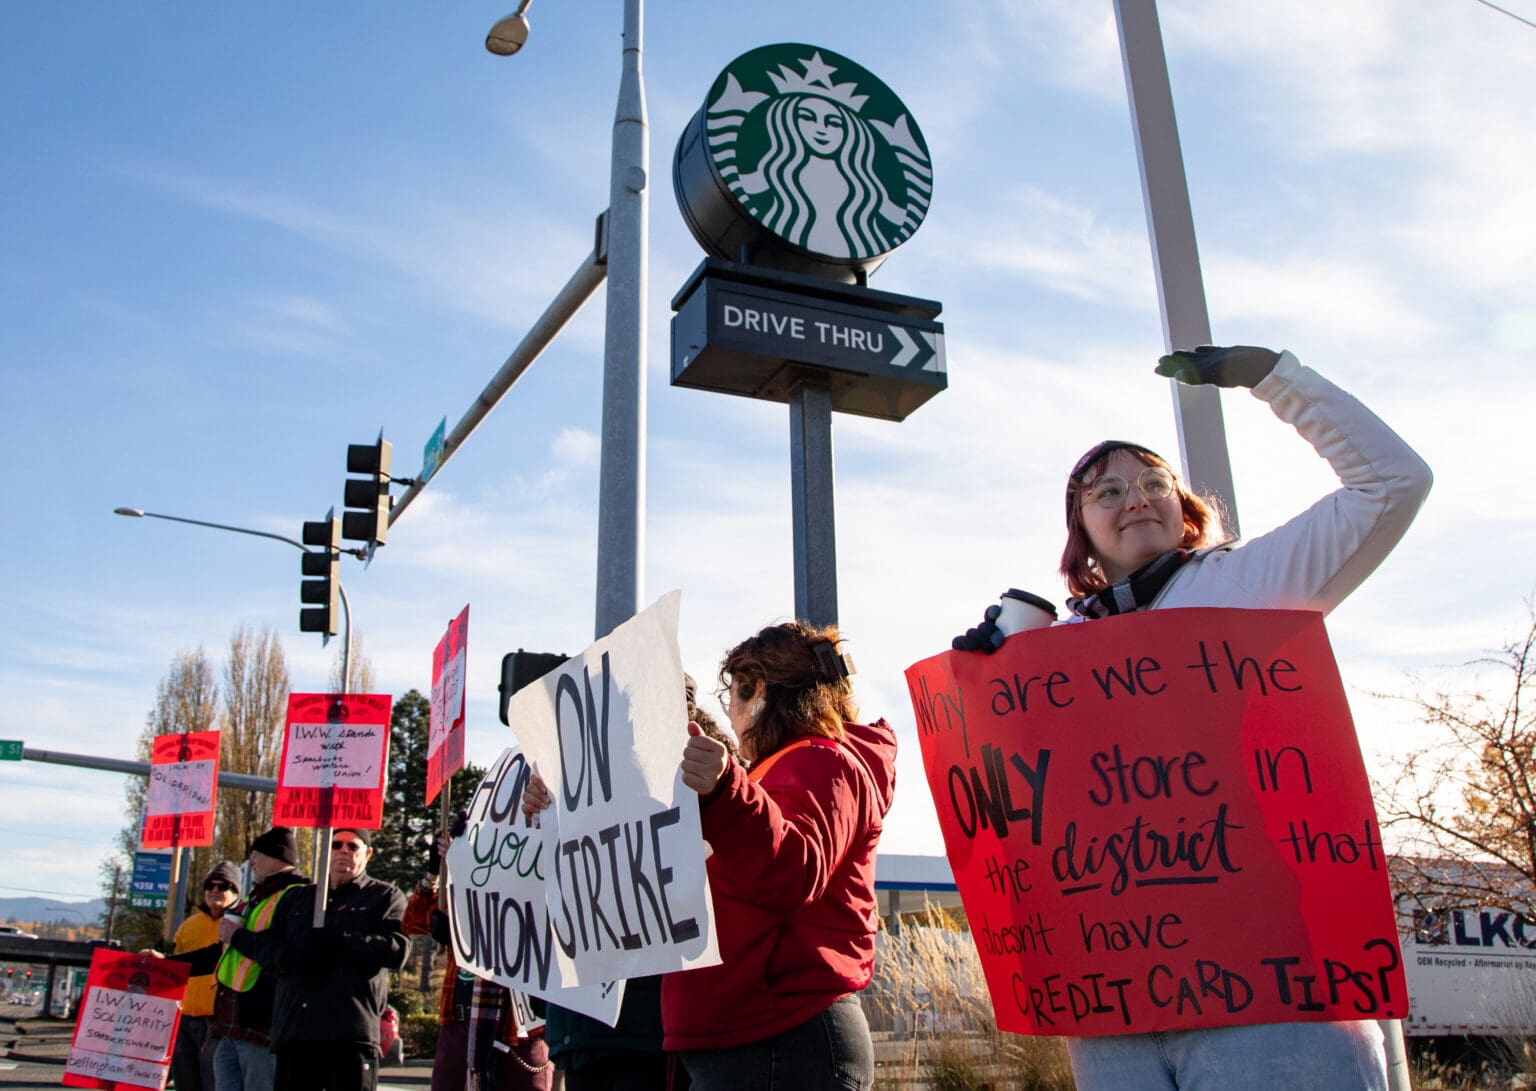 Supervisor Kelly Cabage, right, and other workers and supporters strike outside the Starbucks with bright red and white signs as they chant for rights.